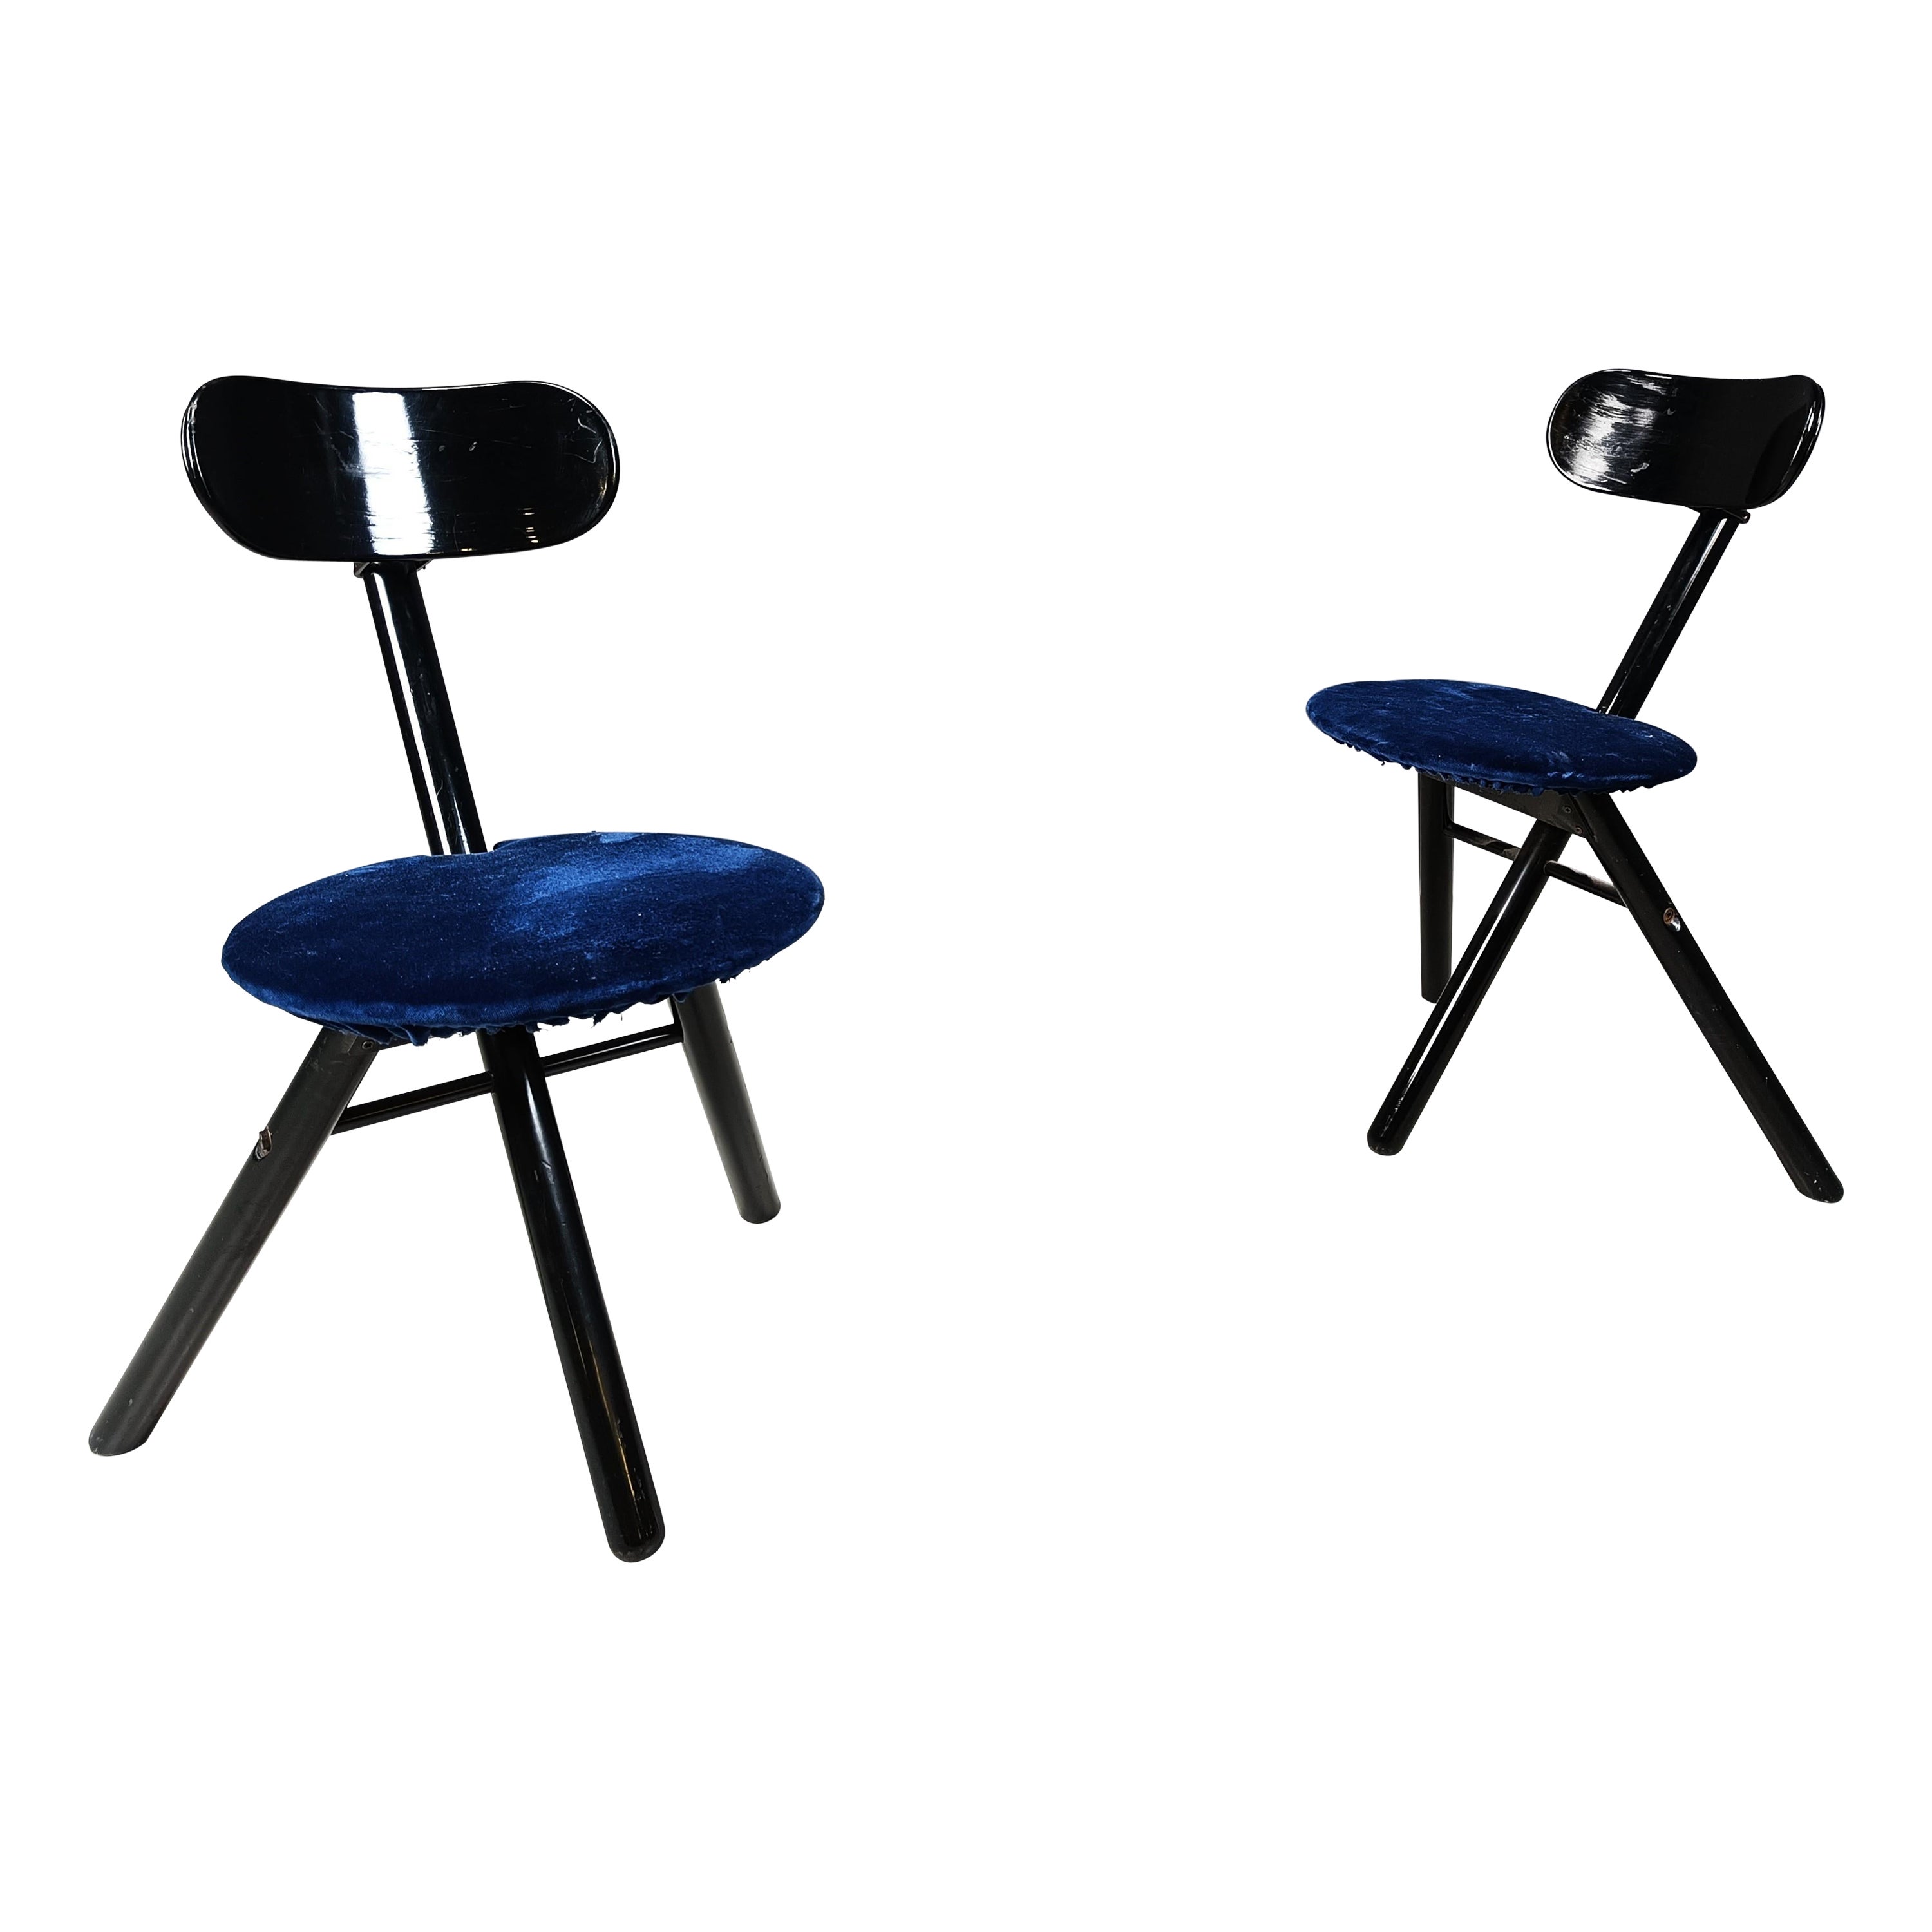 Pair of foldable stools by Calligaris, 1990s